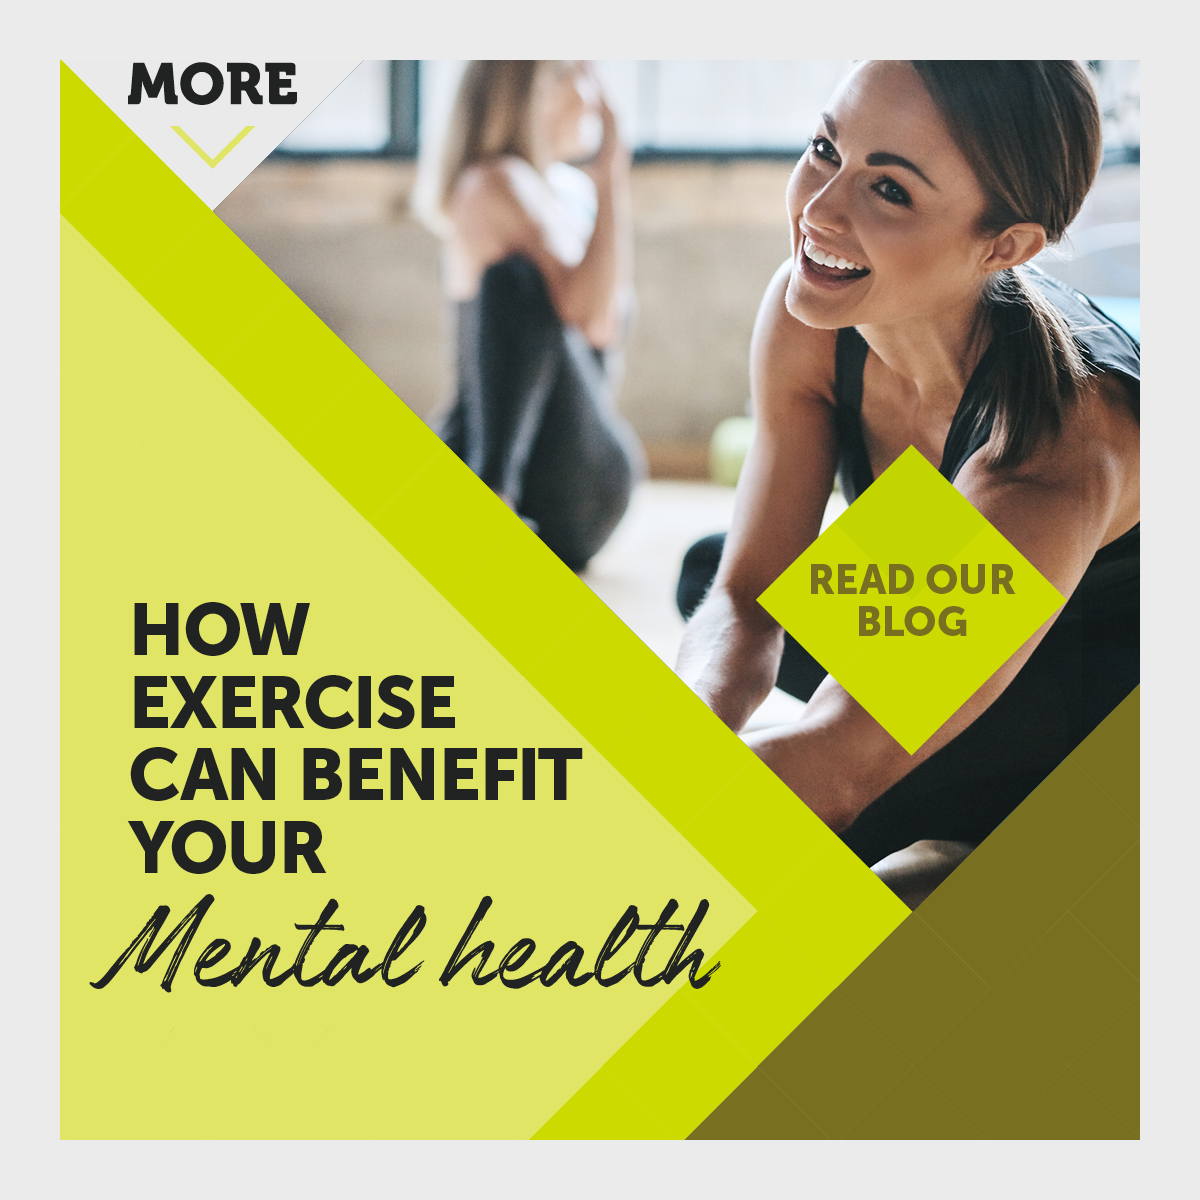 Help spread awareness of the amazing benefits of exercise on our mental health. It can help manage anxiety and depression, improve sleep and boost self-esteem👉 bishamabbeynsc.co.uk/nsc/news/why-e…